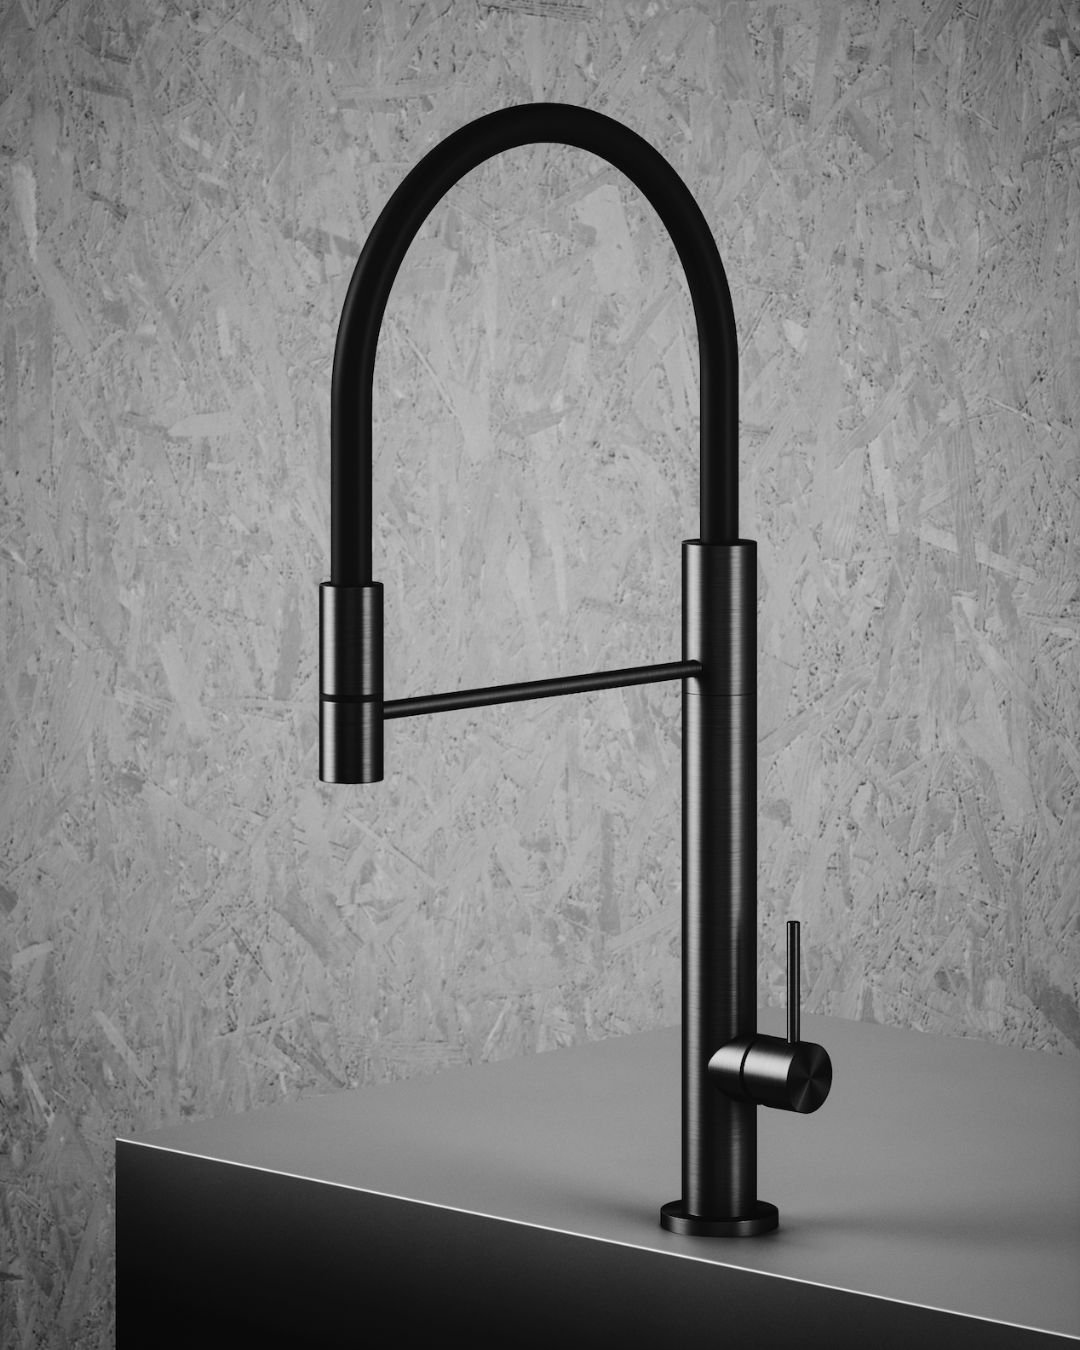 Quadrodesign _ what it takes to become a design company _ kitchen & bathroom faucet systems